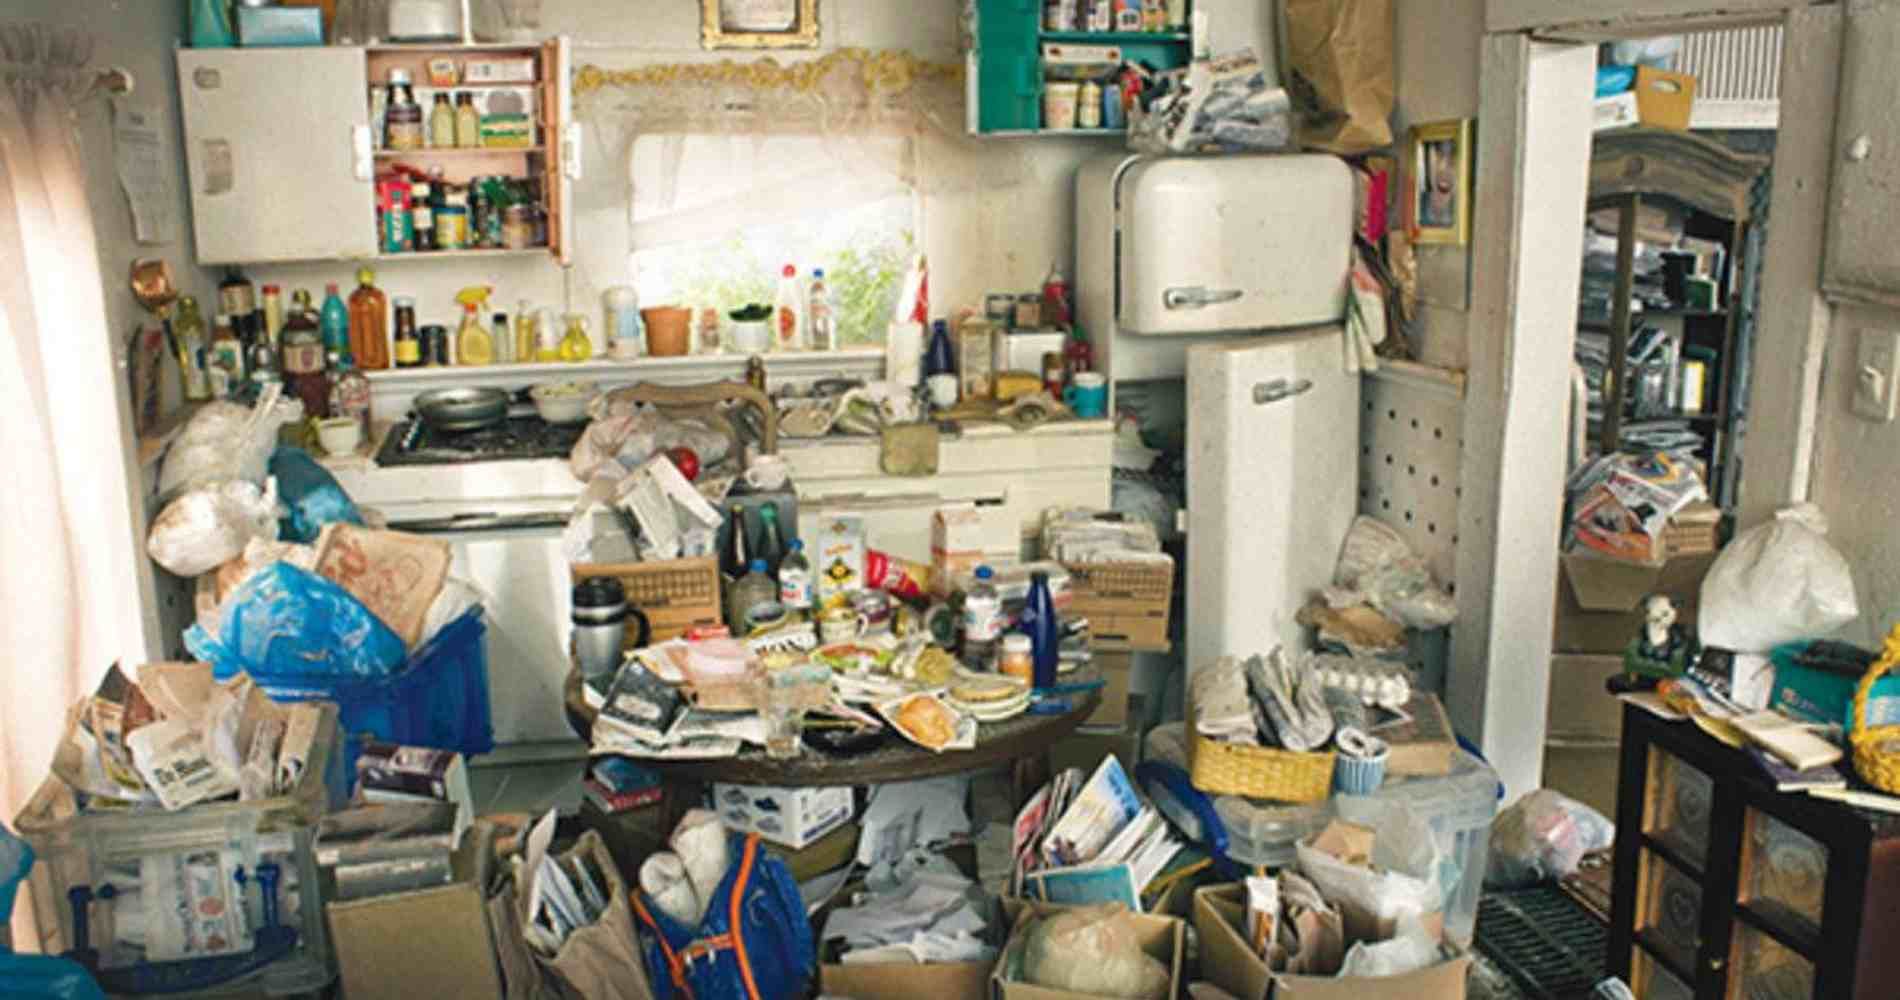 #1 for Hoarding Cleanup in Sun City West, AZ with Over 1200 5-Star Reviews!